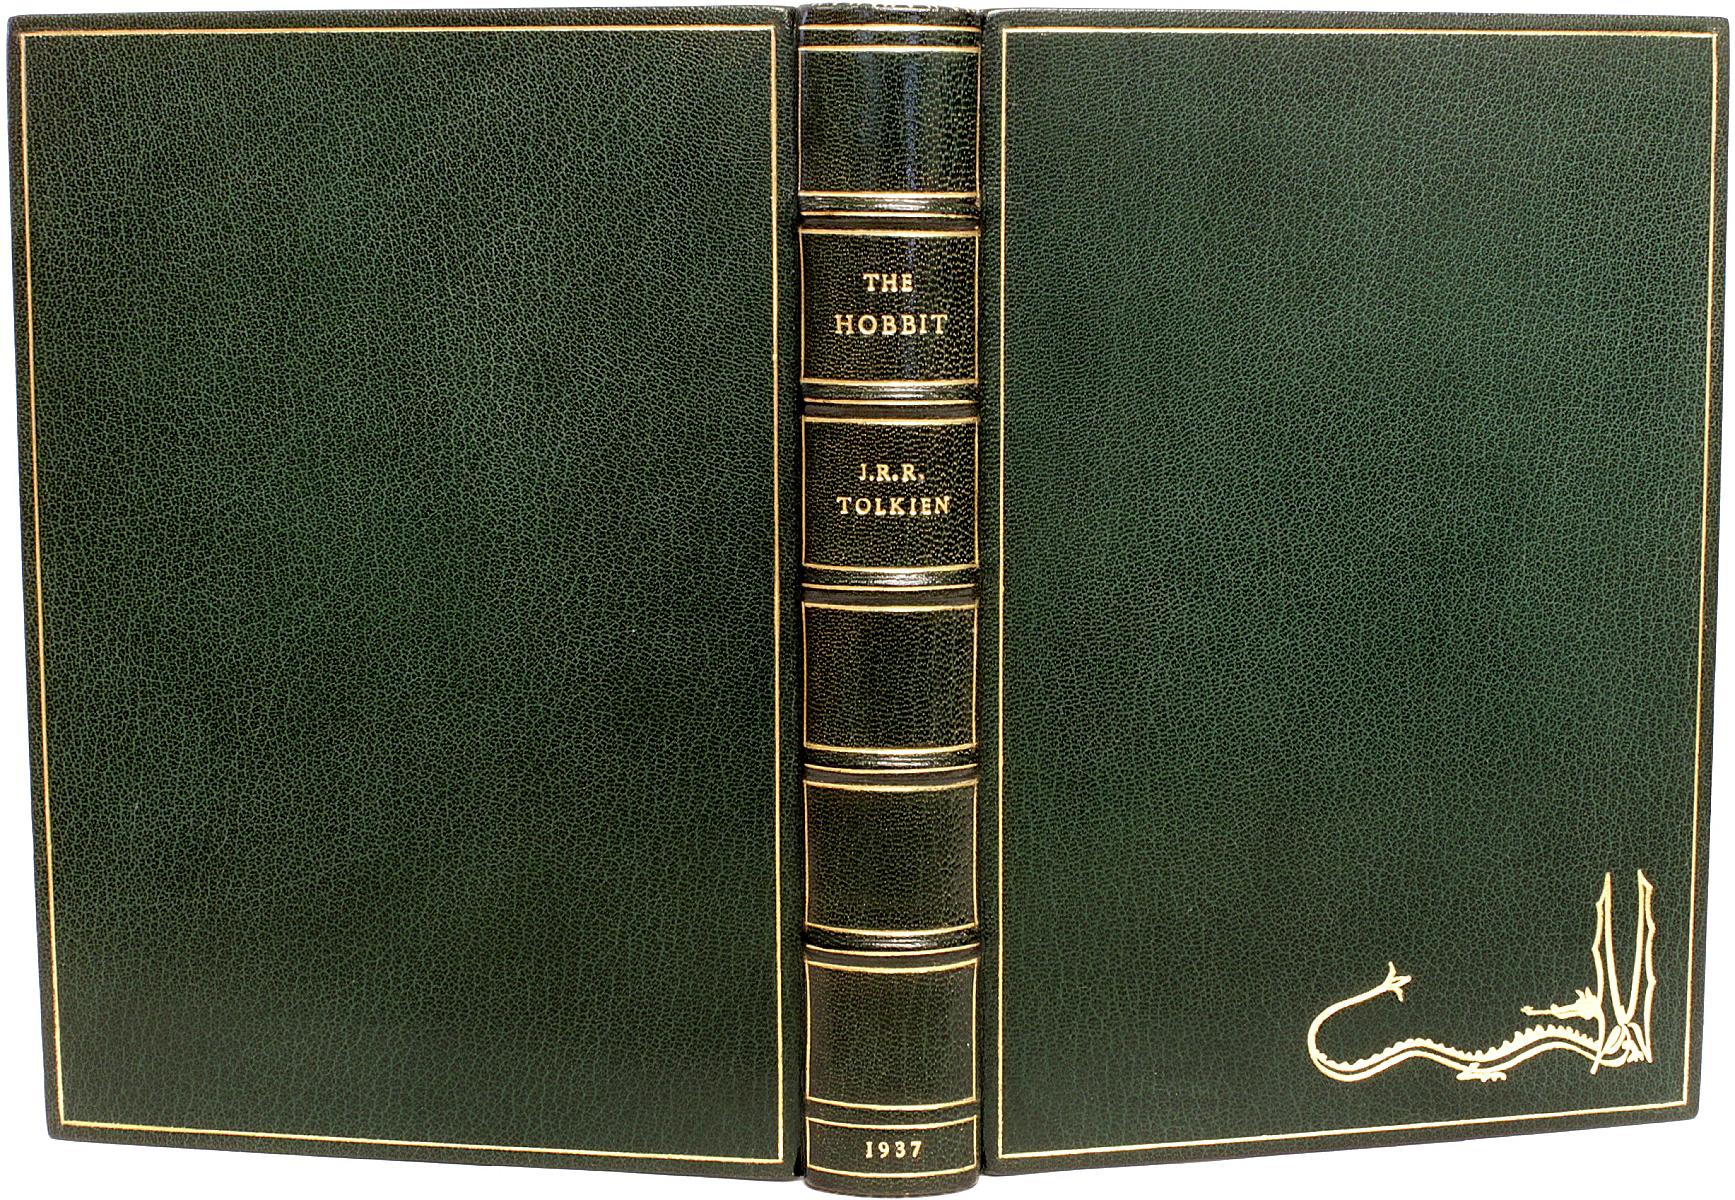 AUTHOR: TOLKIEN, J. R. R. 

TITLE: The Hobbit or There and Back Again.

PUBLISHER: London: George Allen & Unwin Ltd, 1937.

DESCRIPTION: FIRST EDITION SECOND IMPRESSION AND THE FIRST WITH COLOR PLATES. 1 vol., 7-1/2